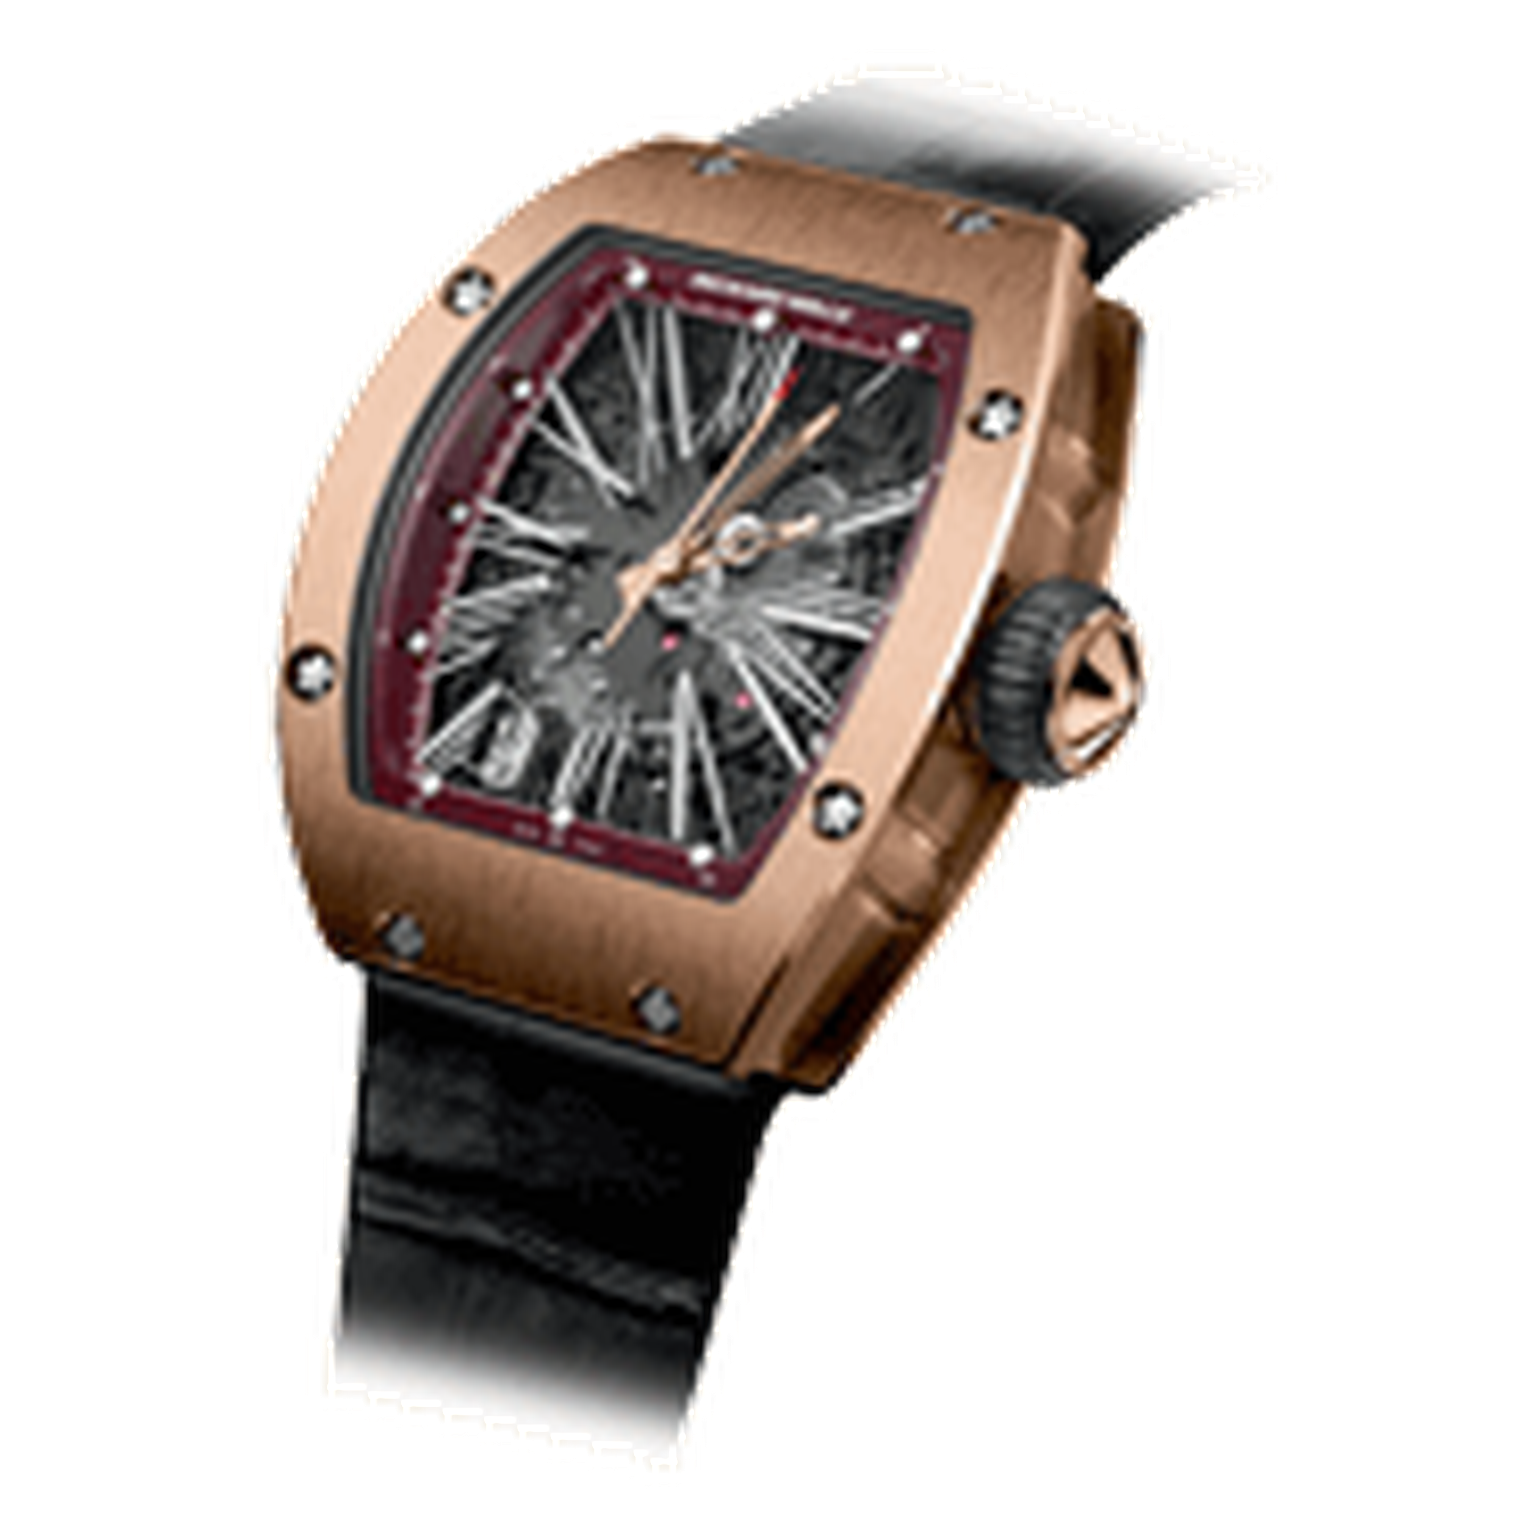 Richard Mille RM 023 in red gold_20131127_Thumbnail